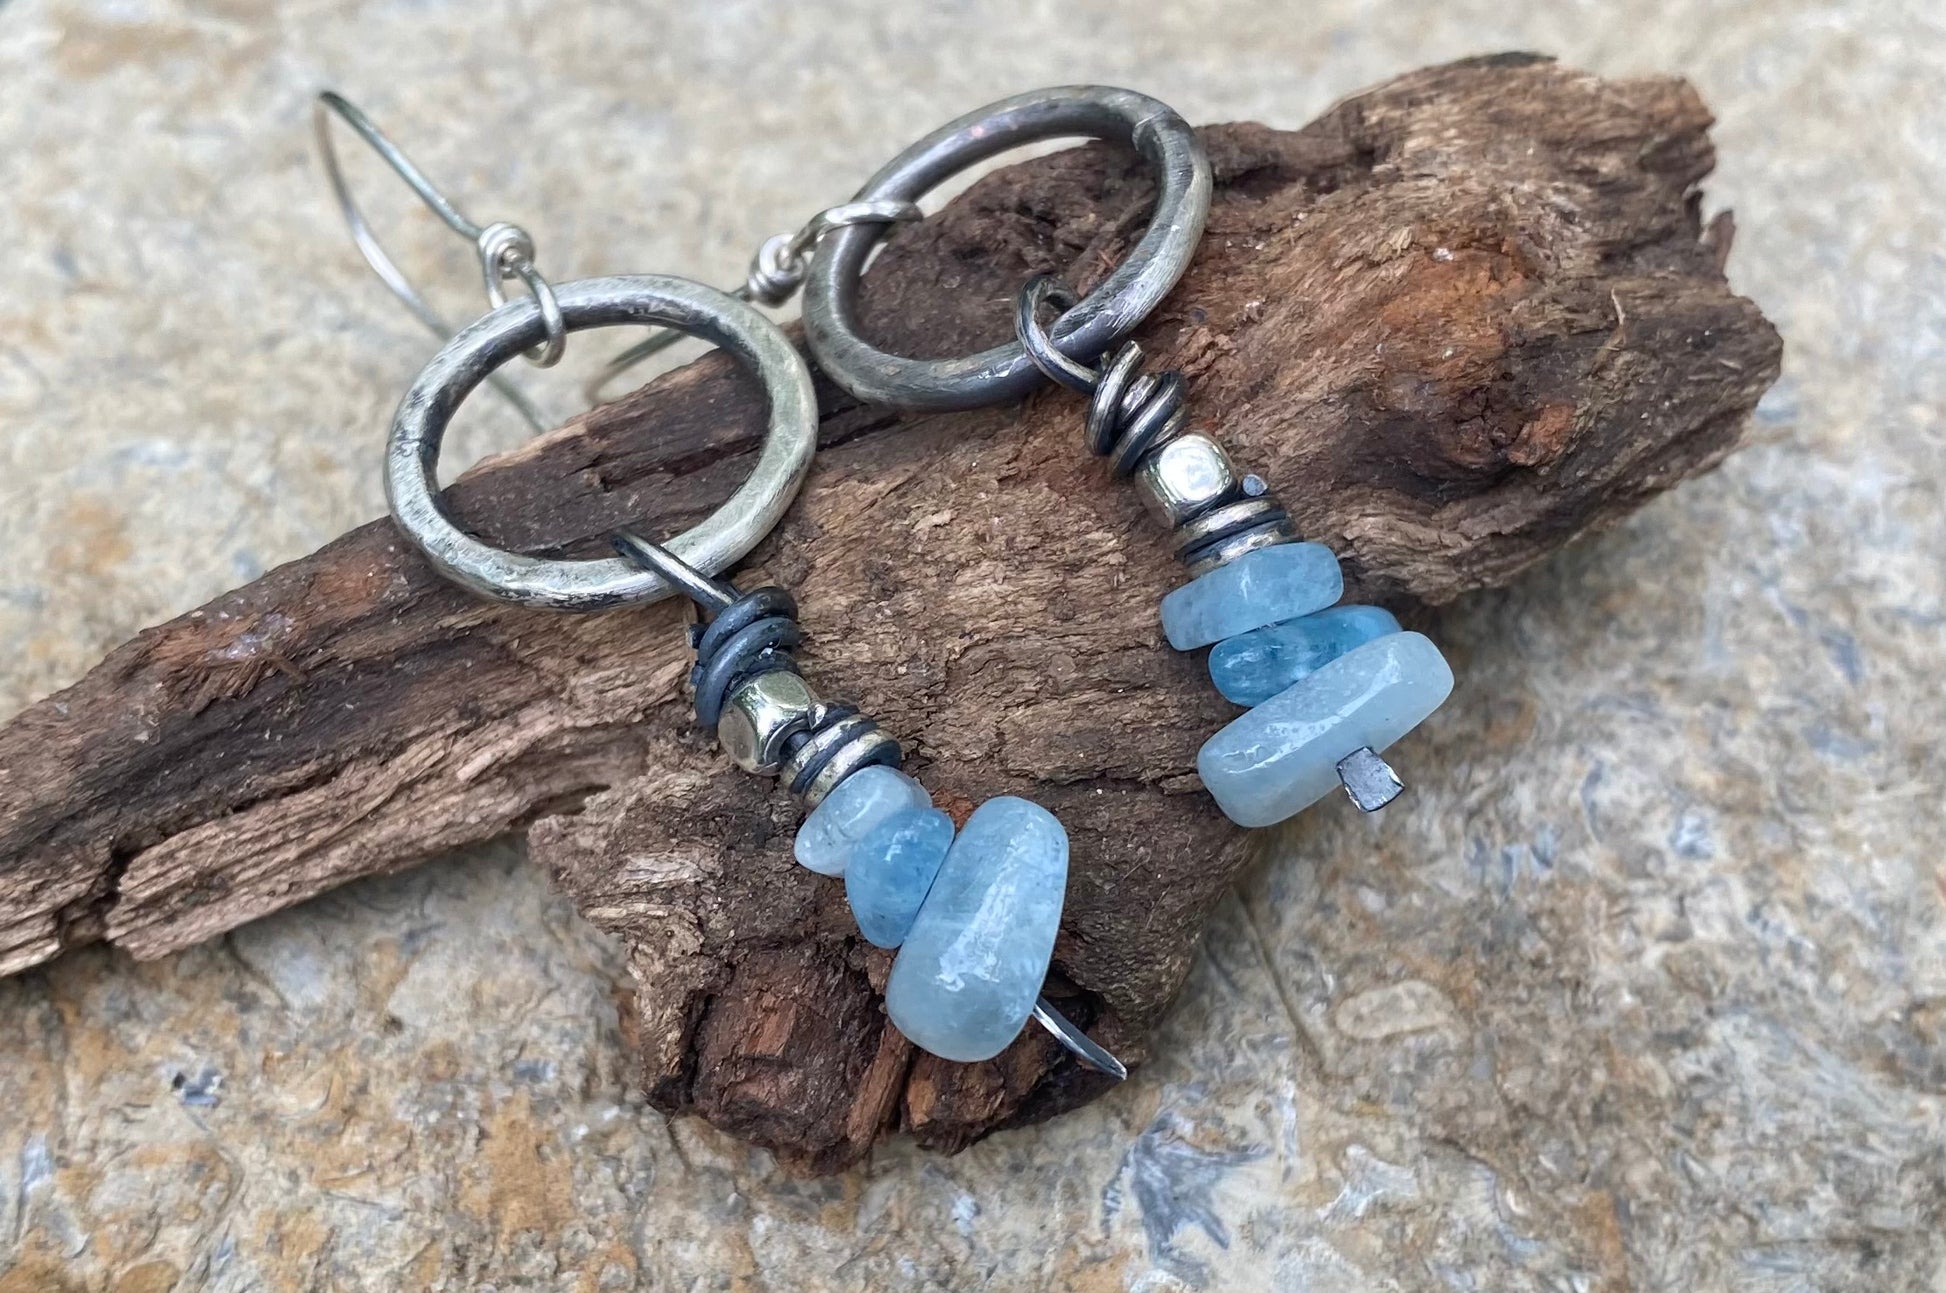 Gemstone earrings - collectionsbytracy.com